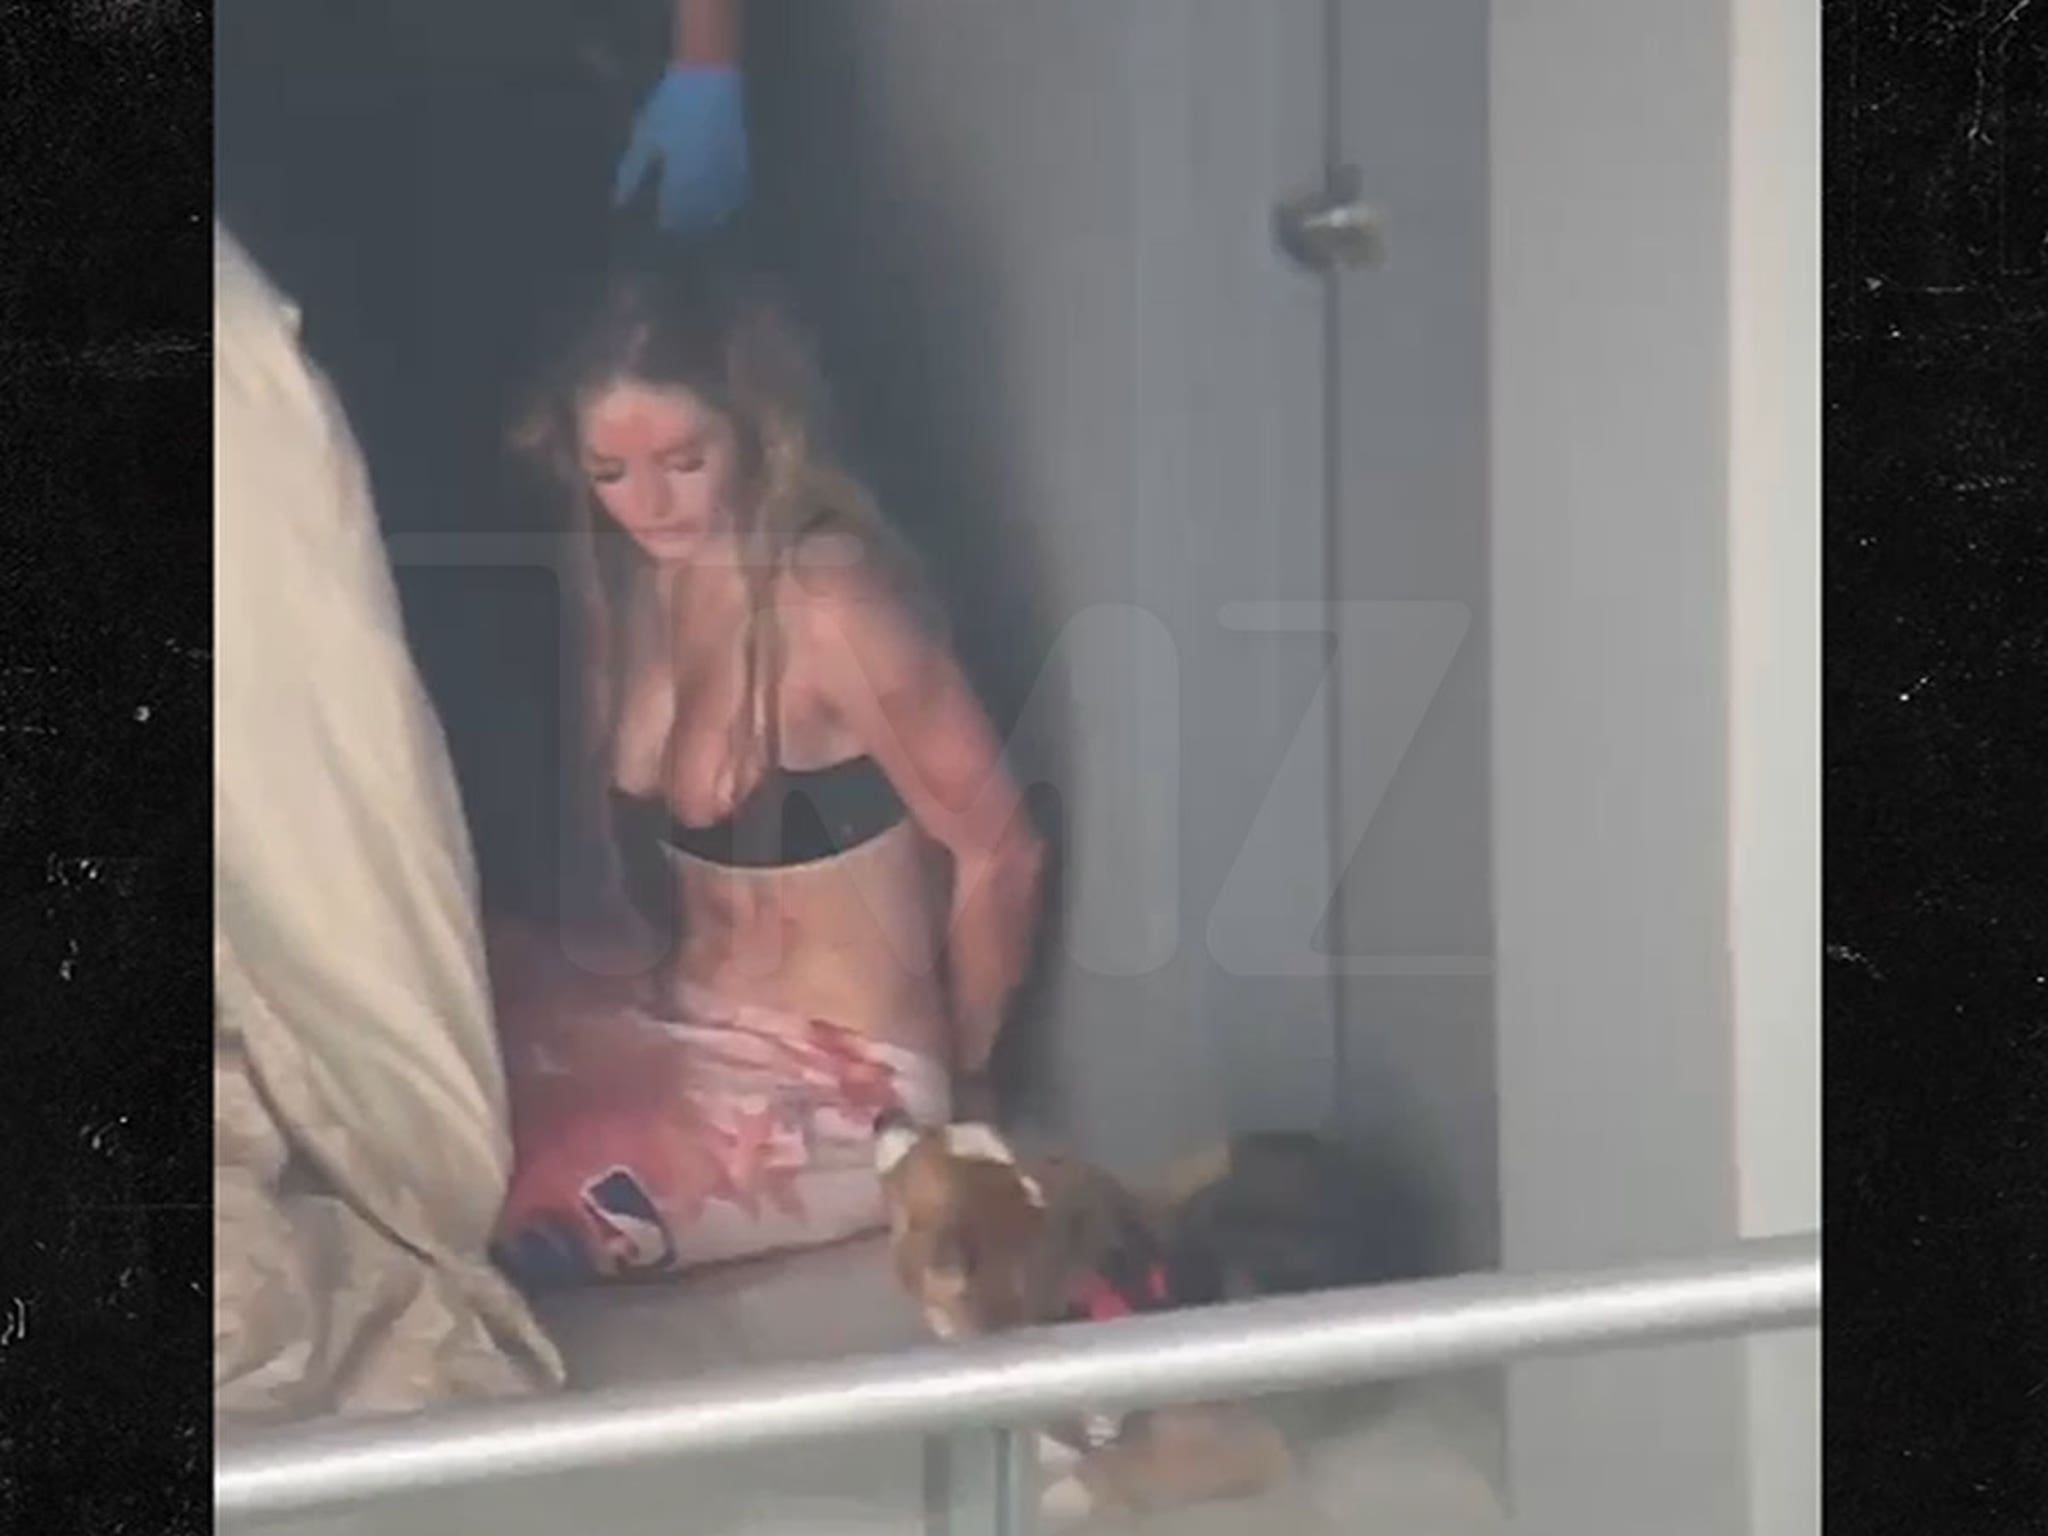 Video From Fatal Miami Stabbing Shows IG Model Covered In Blood